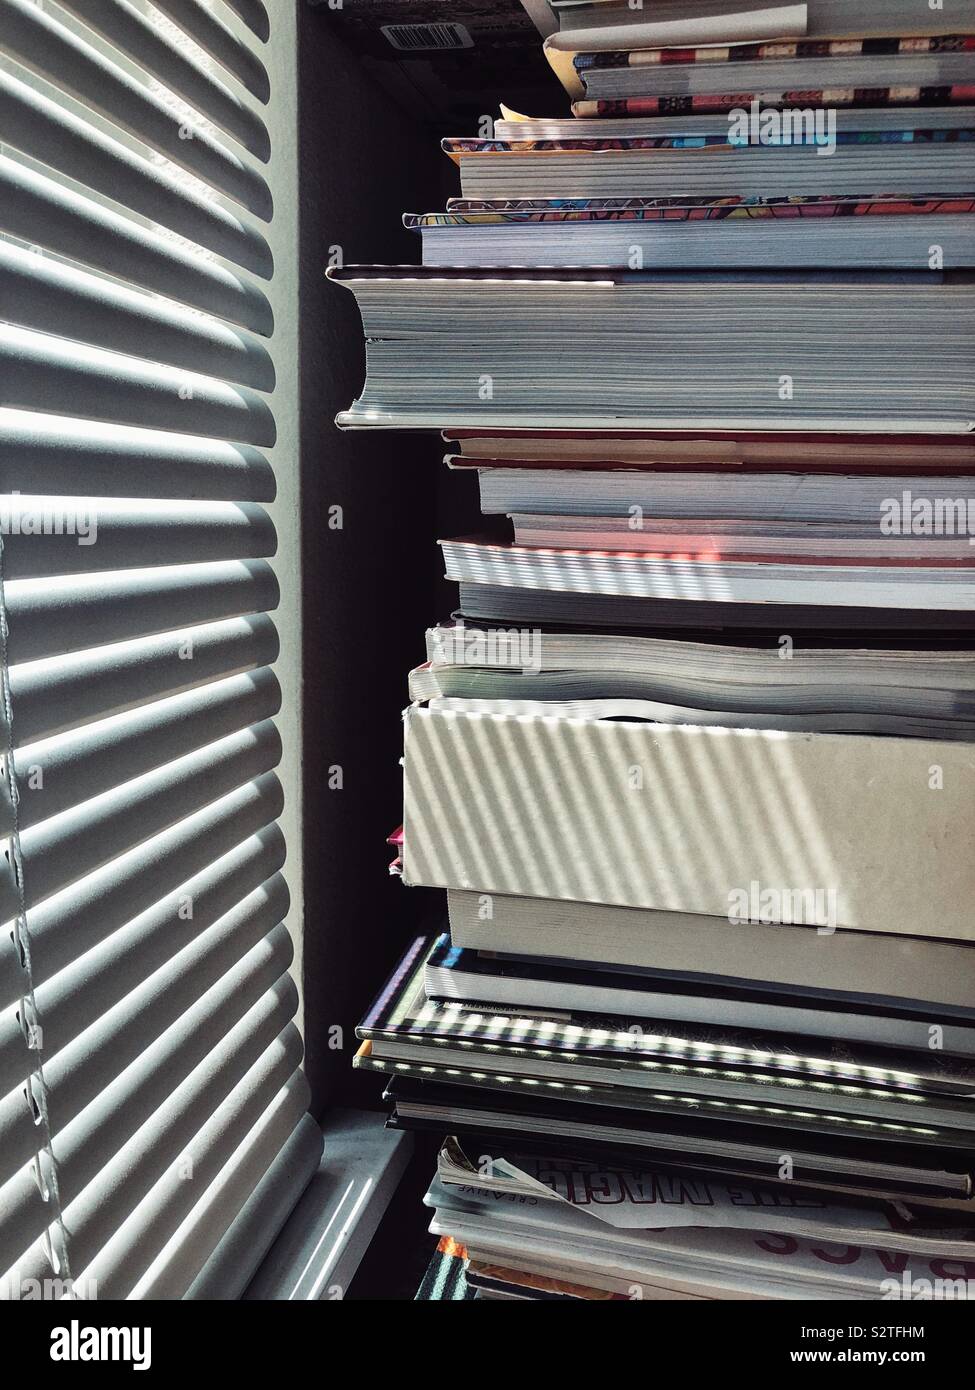 Books piled up near window with blinds Stock Photo